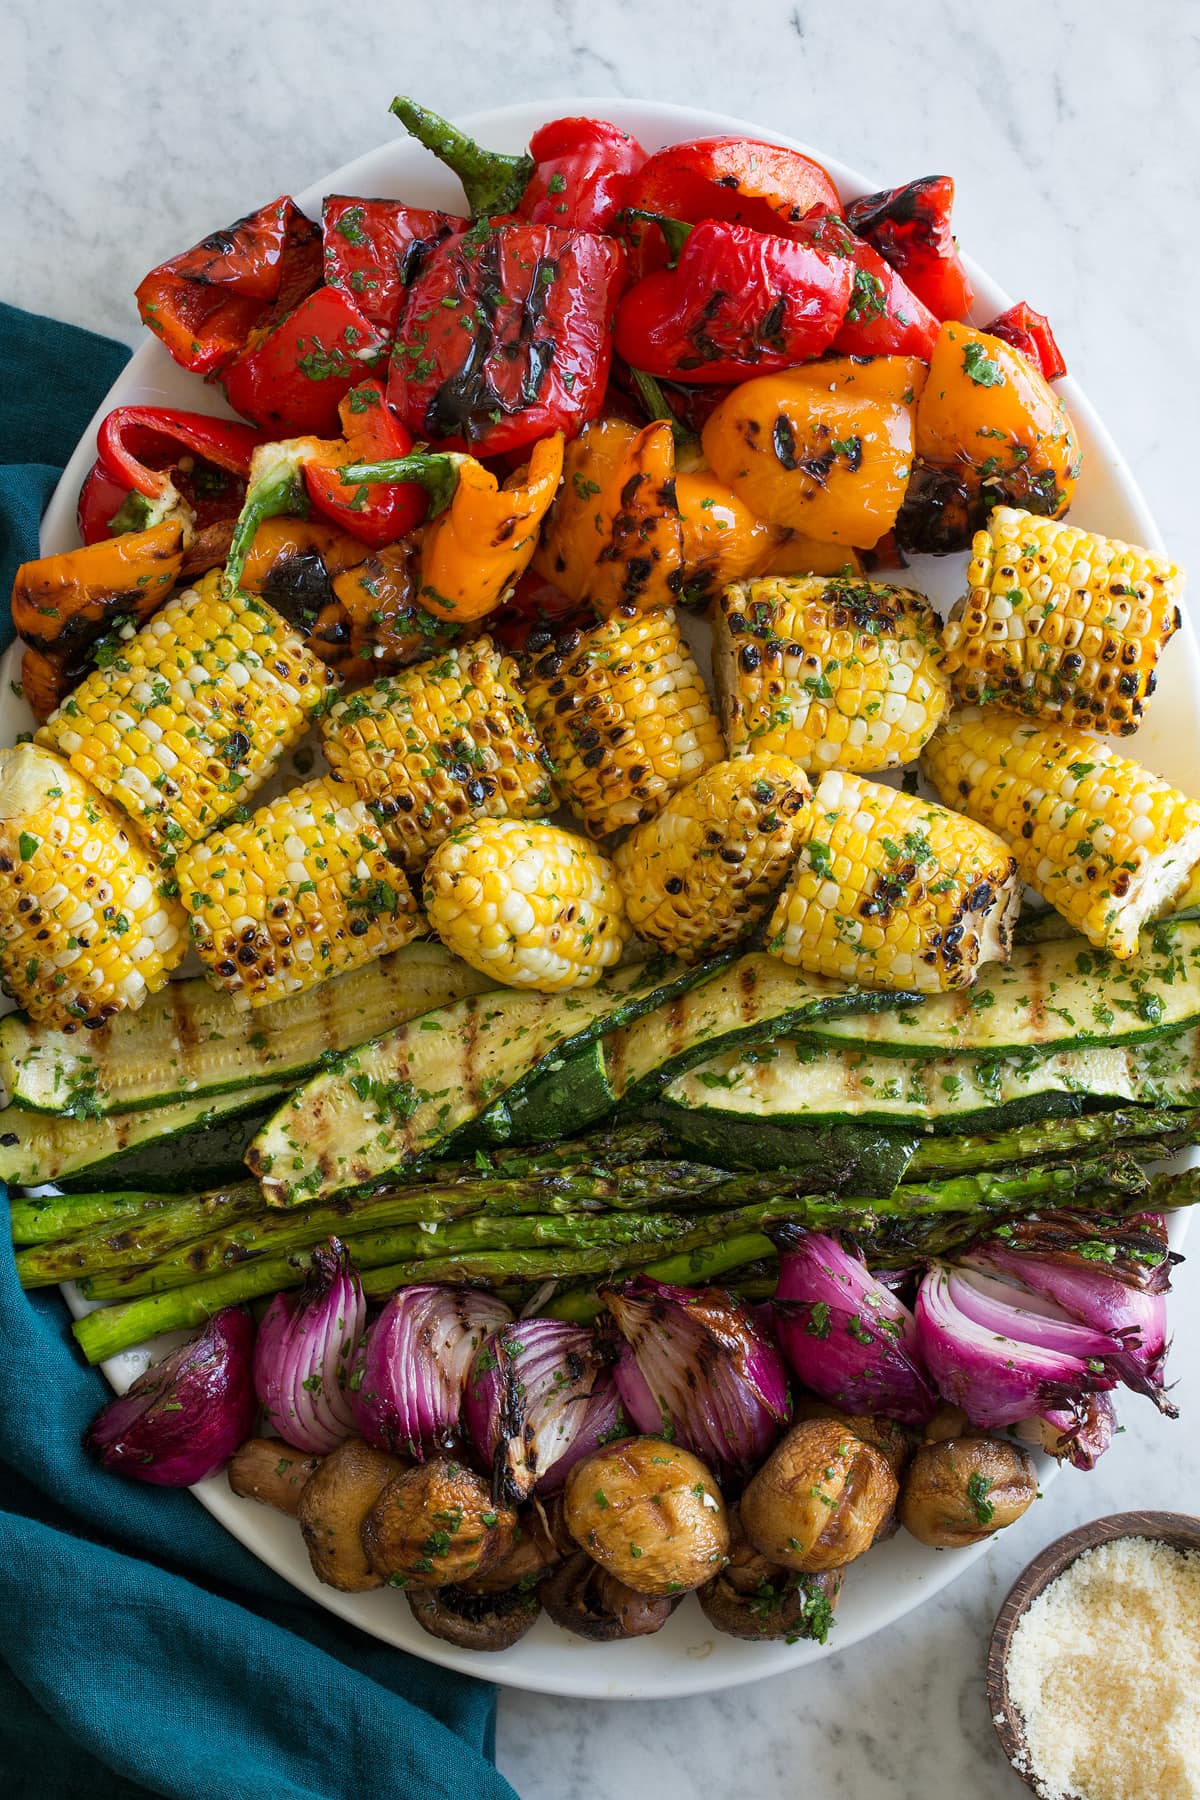 Platter with rainbow color of grilled vegetables.